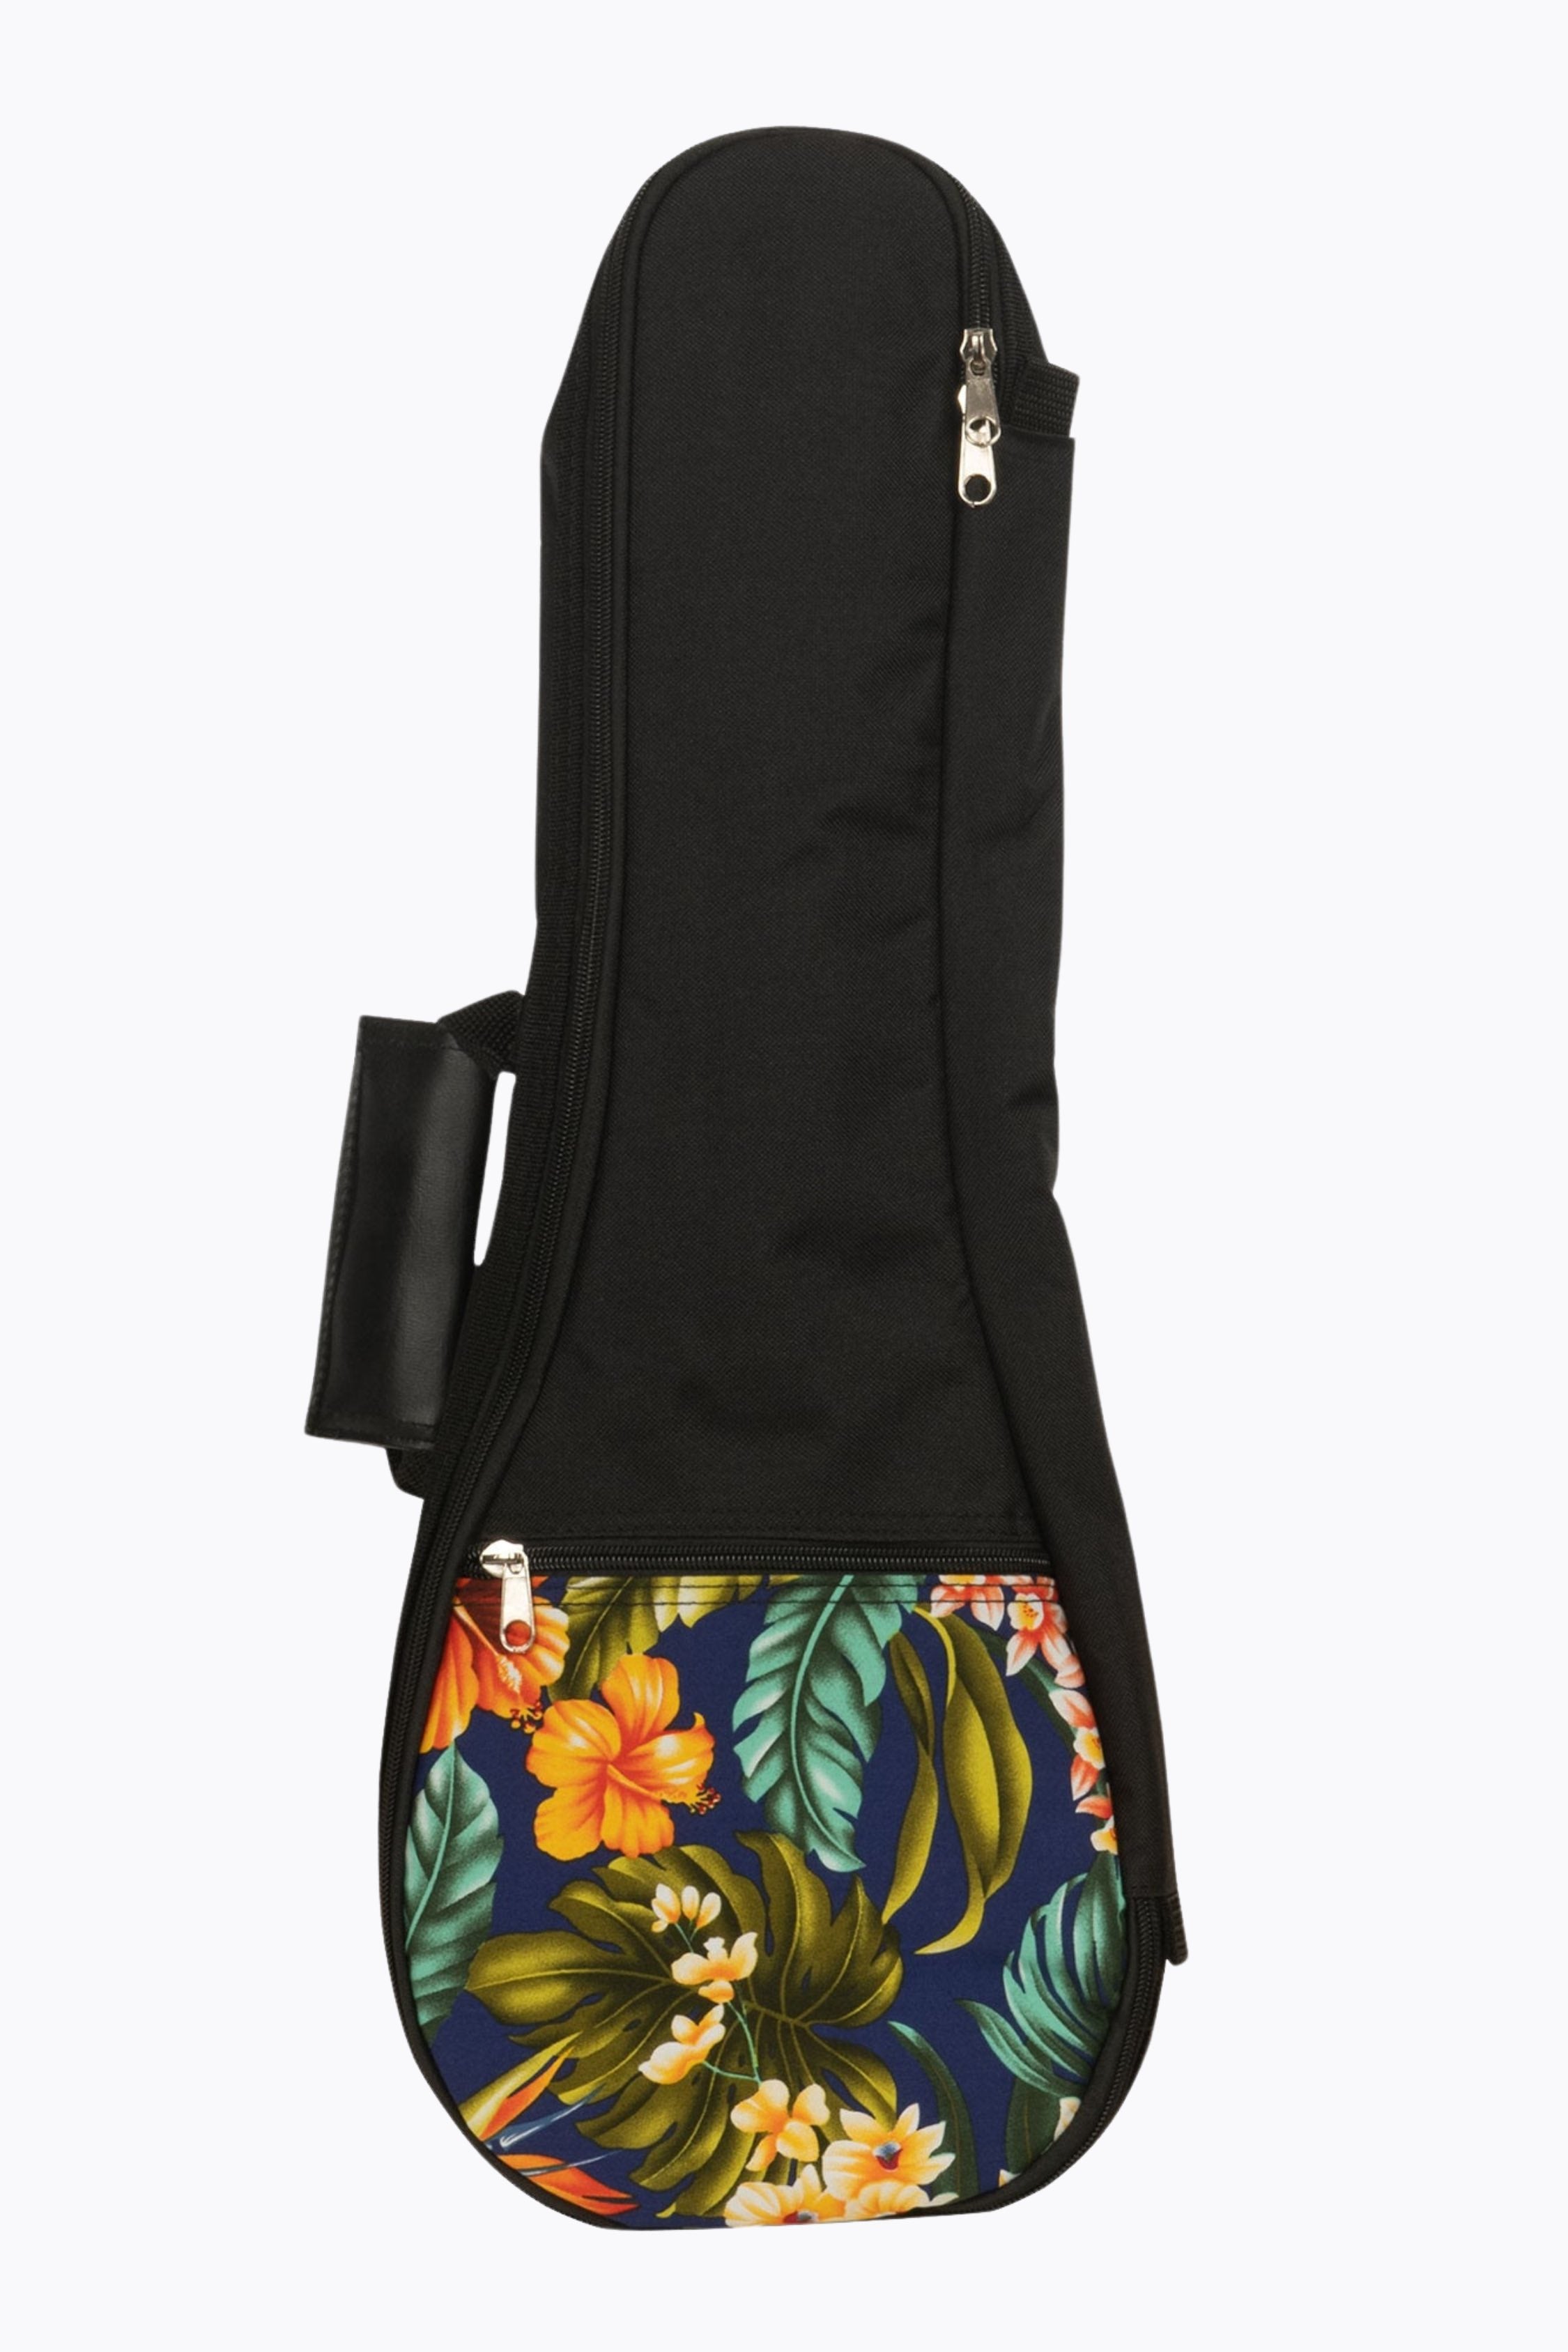 Floral Hawaiian Accent Bag for Ukulele (Soprano)